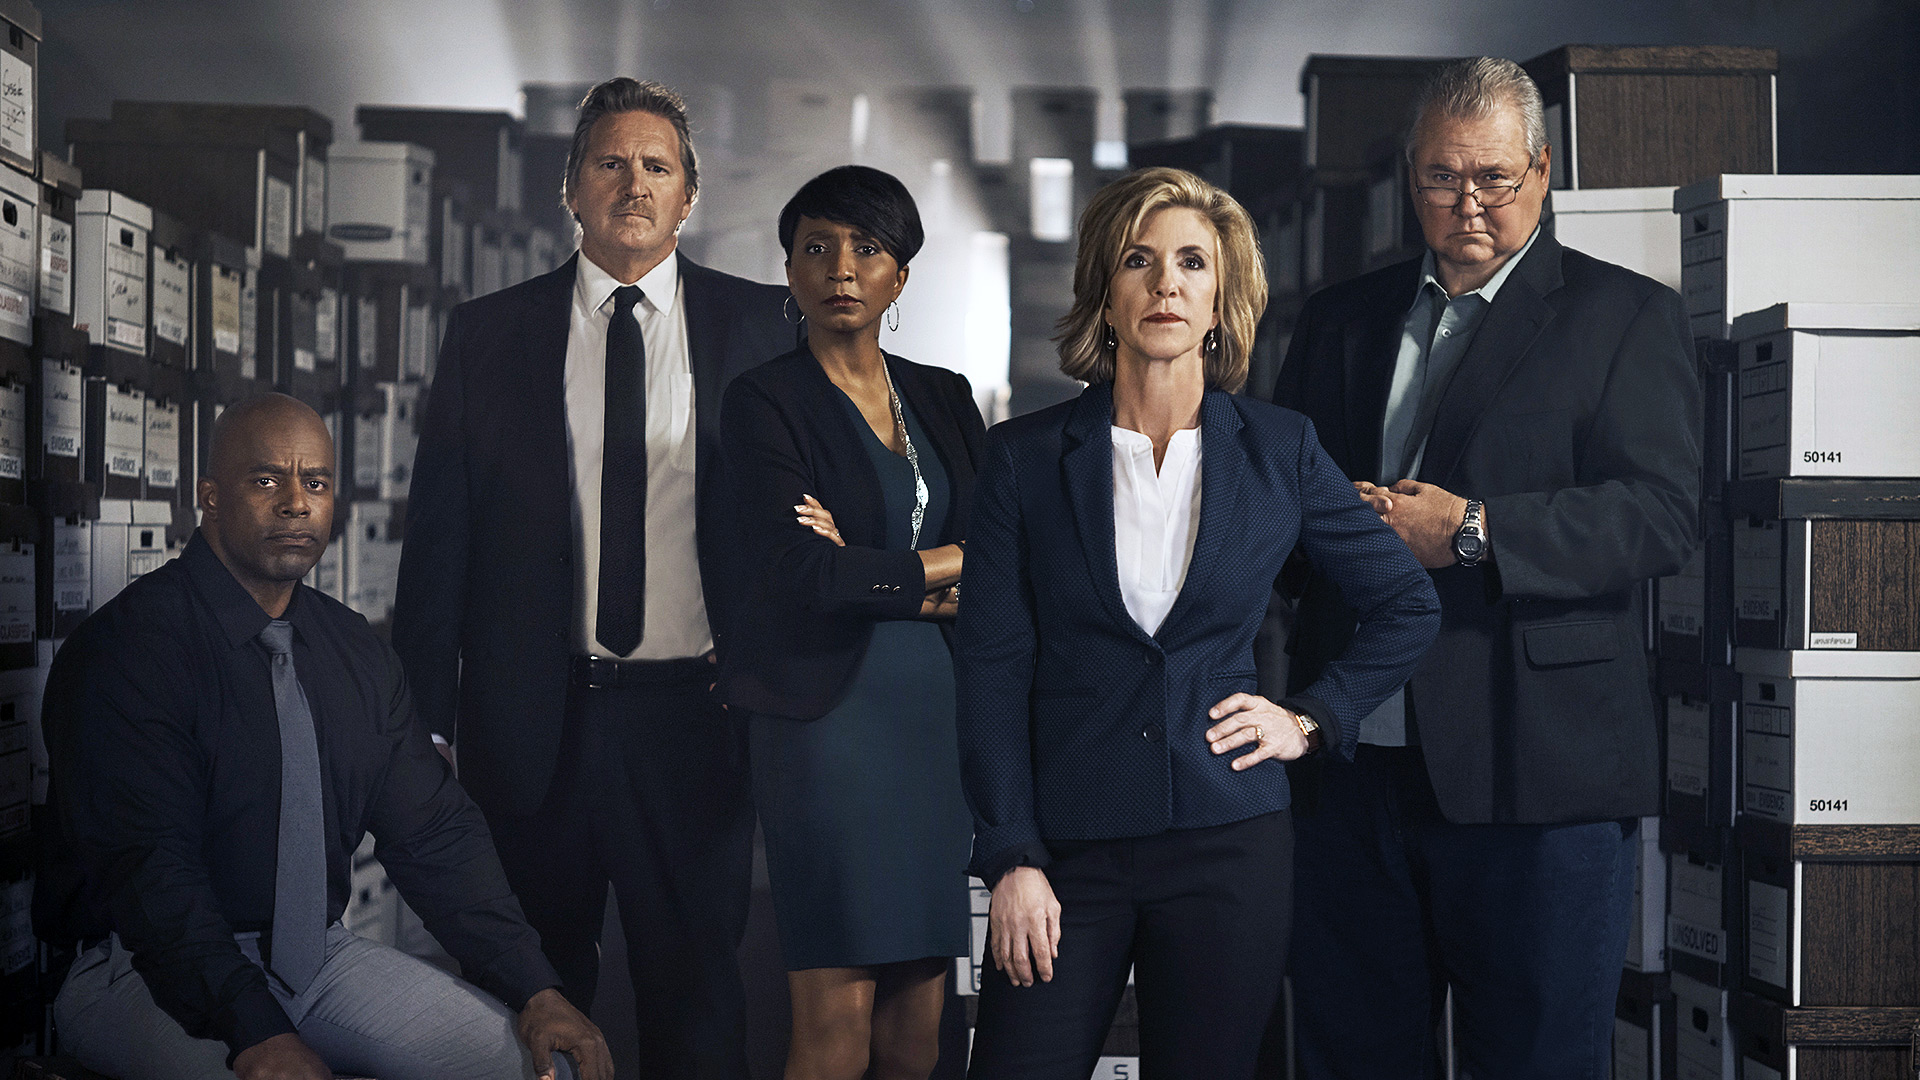 All New Cold Justice Image